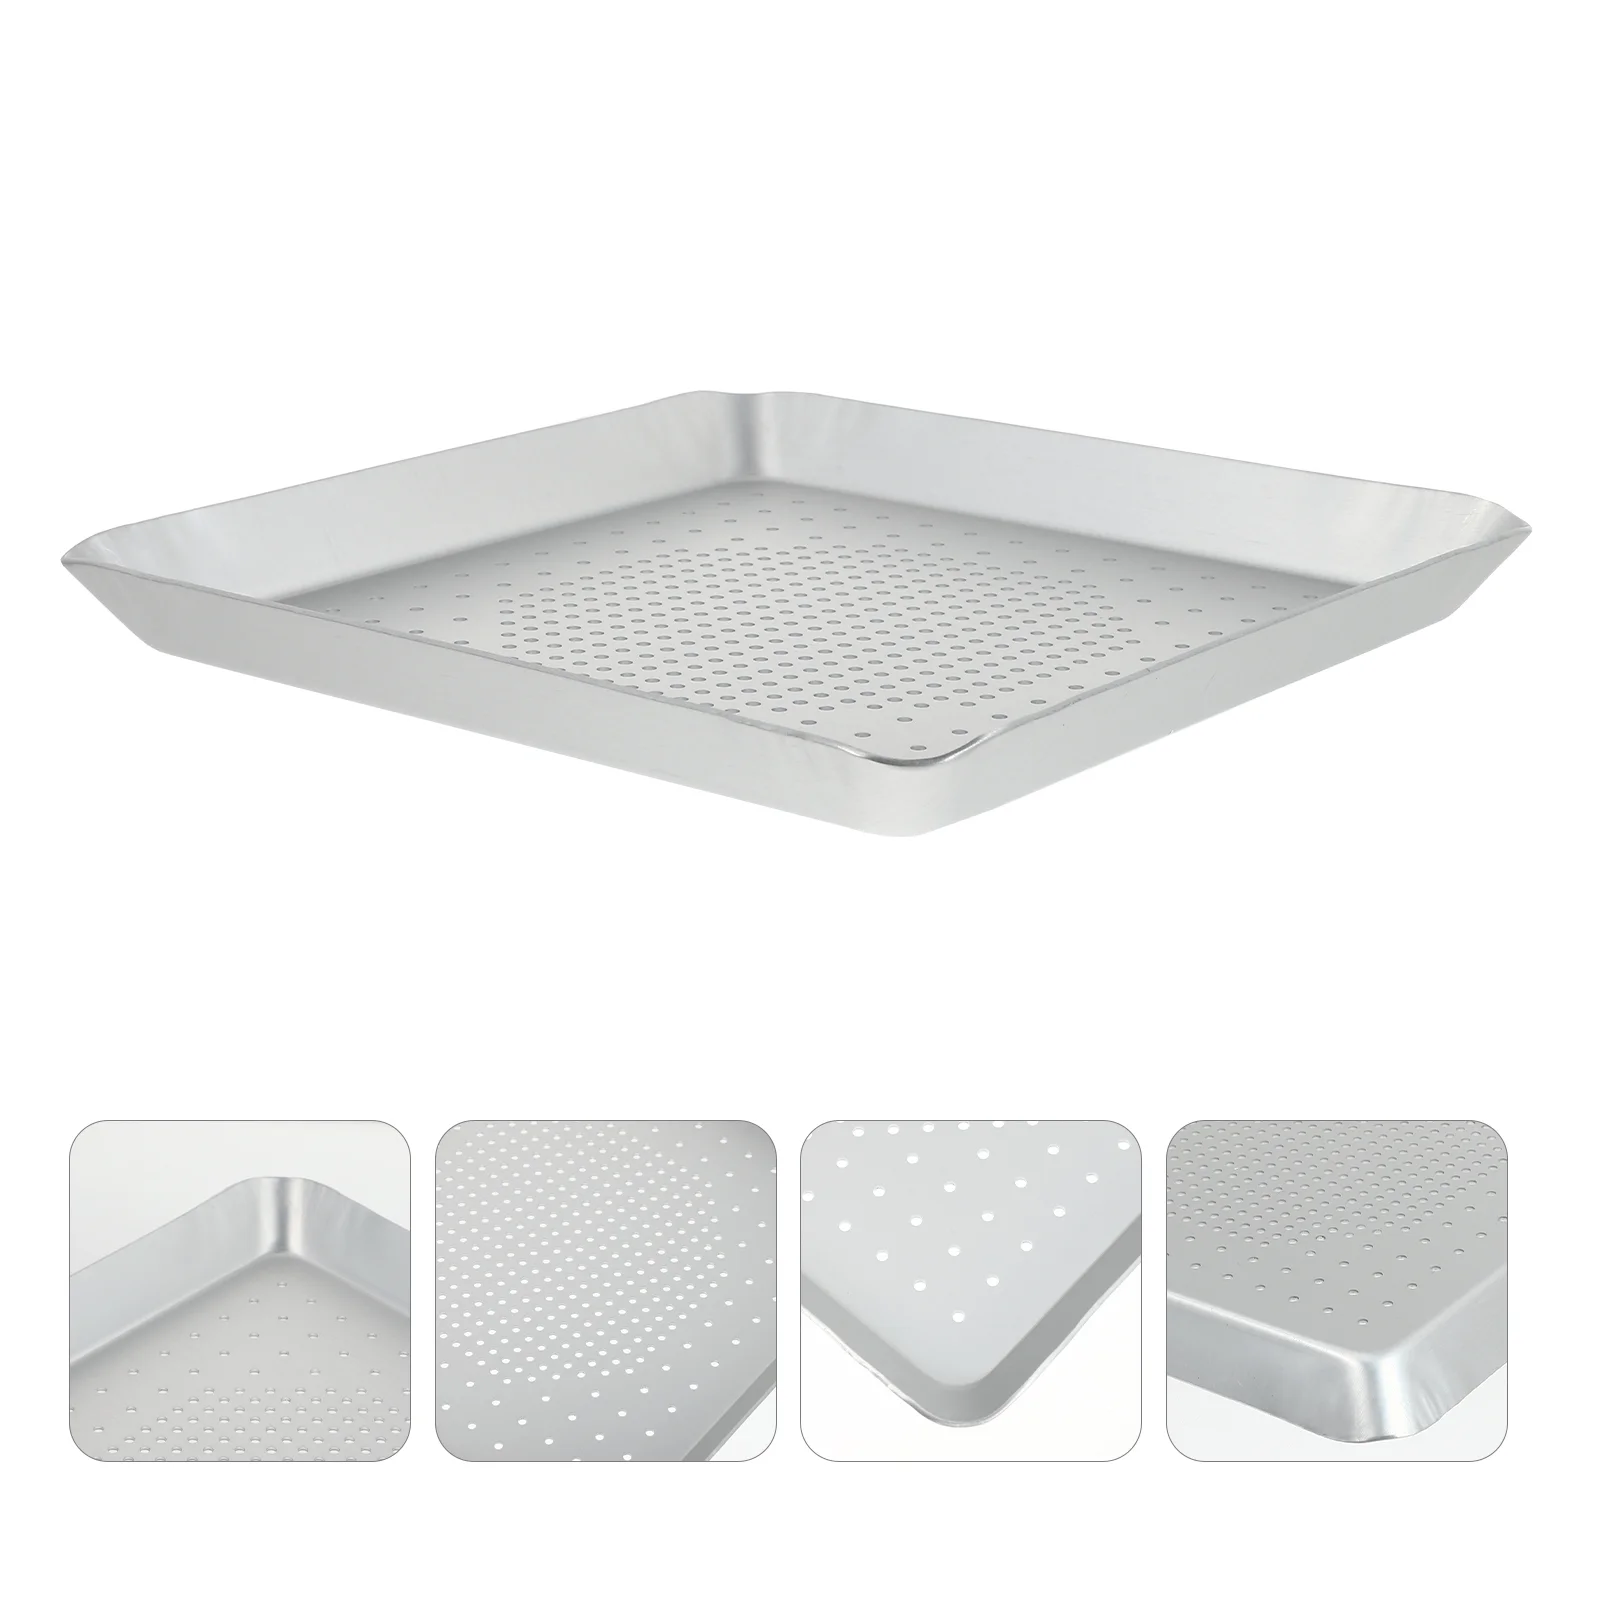 

Pizza Pan Tray Baking Oven Square Holesplate Noncrisper Stick Steel Stainless Cake Perforated Sheet Pie Bakeware Aluminium